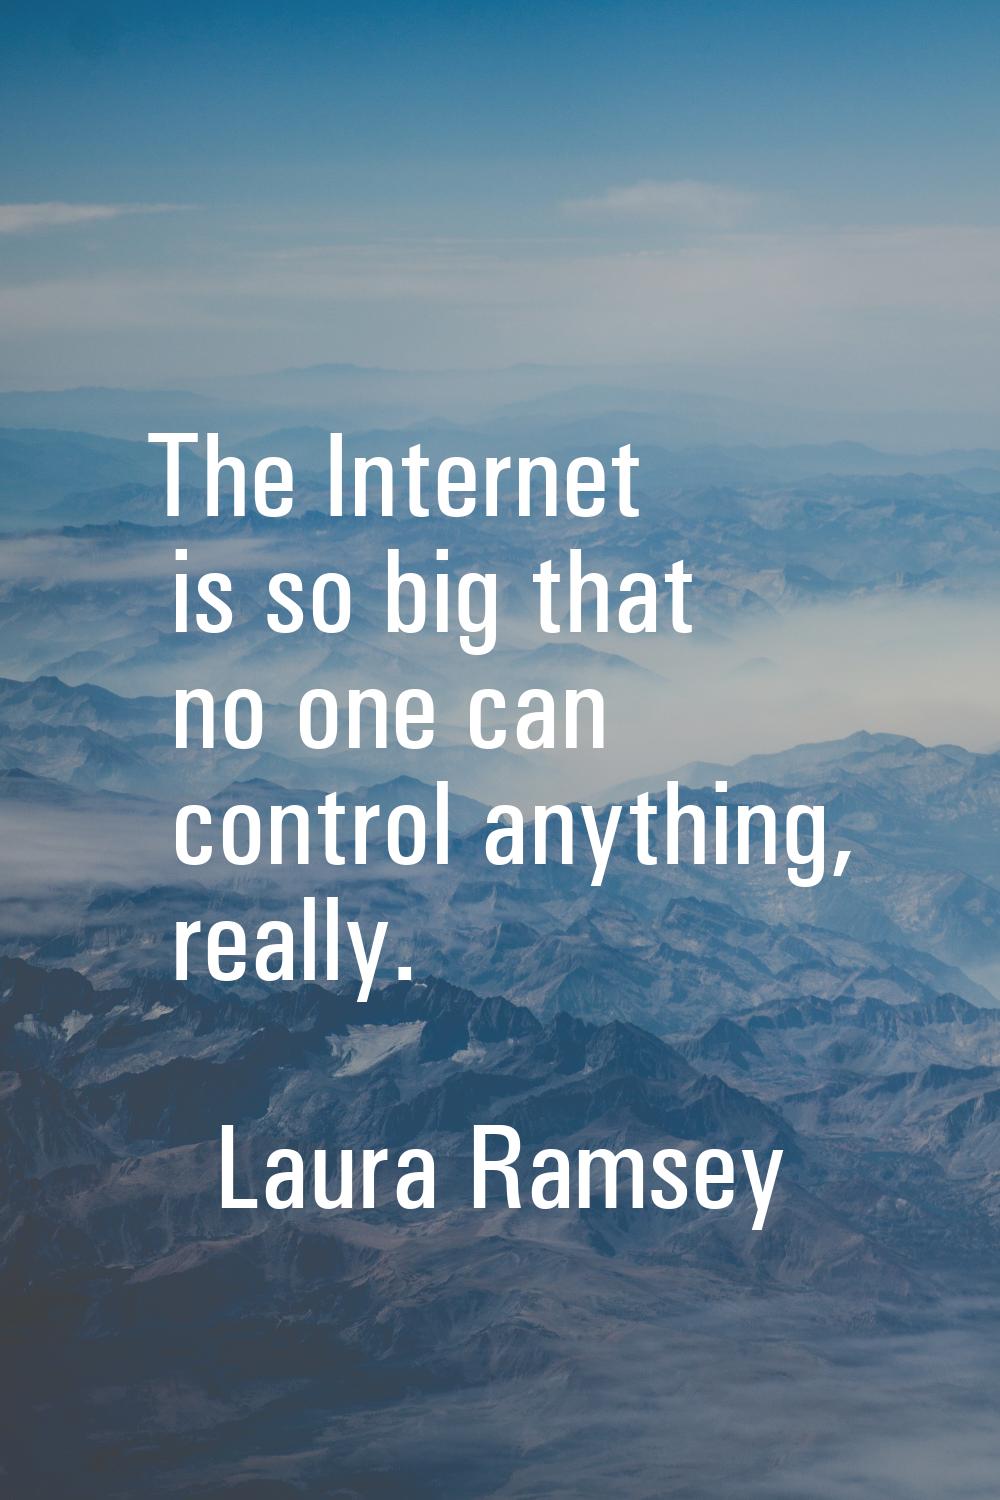 The Internet is so big that no one can control anything, really.